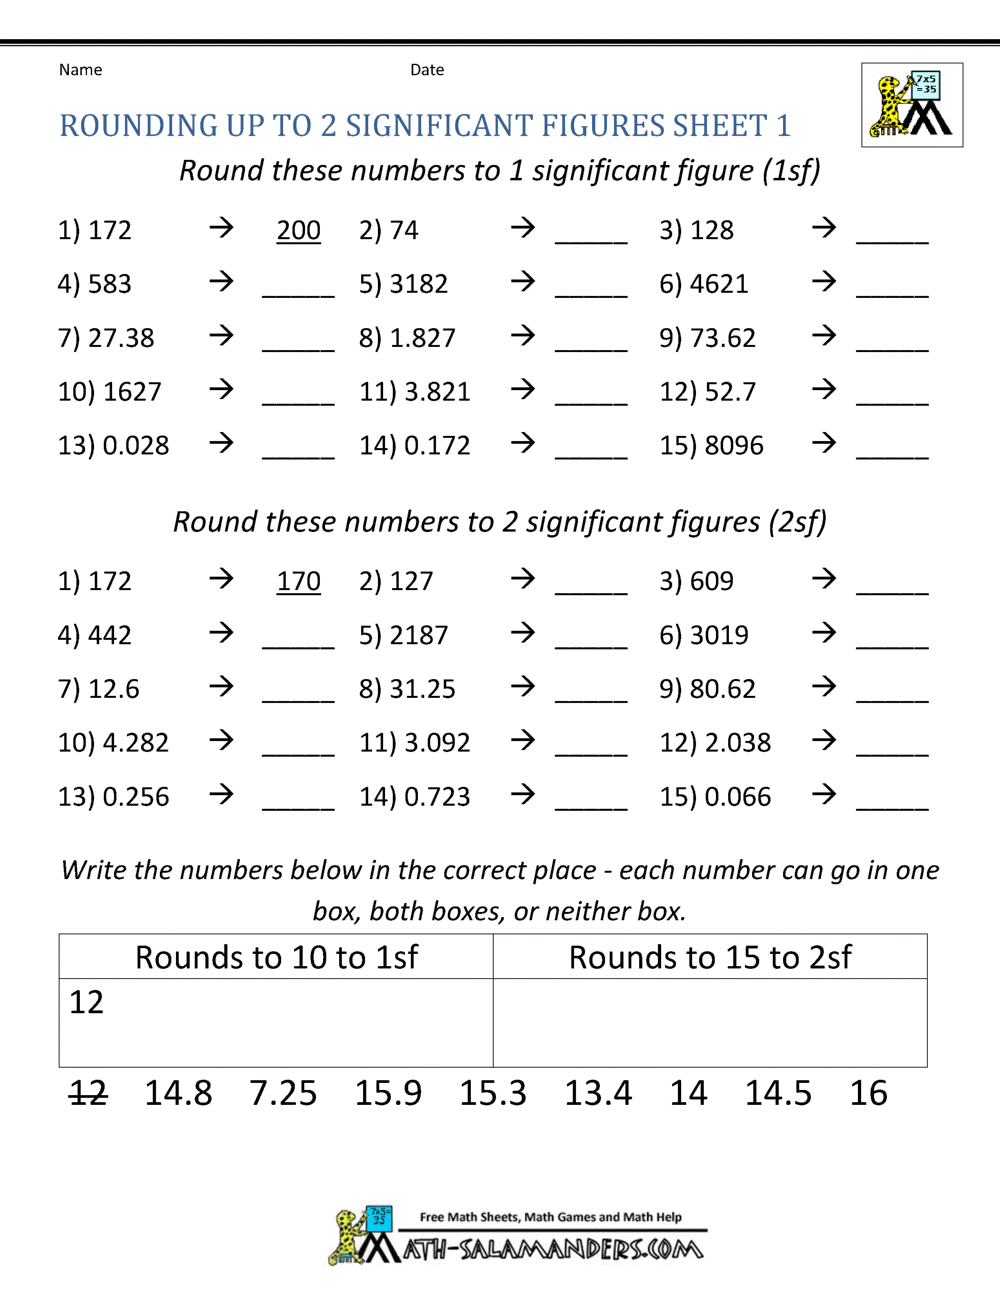 Rounding Significant Figures With Significant Figures Practice Worksheet